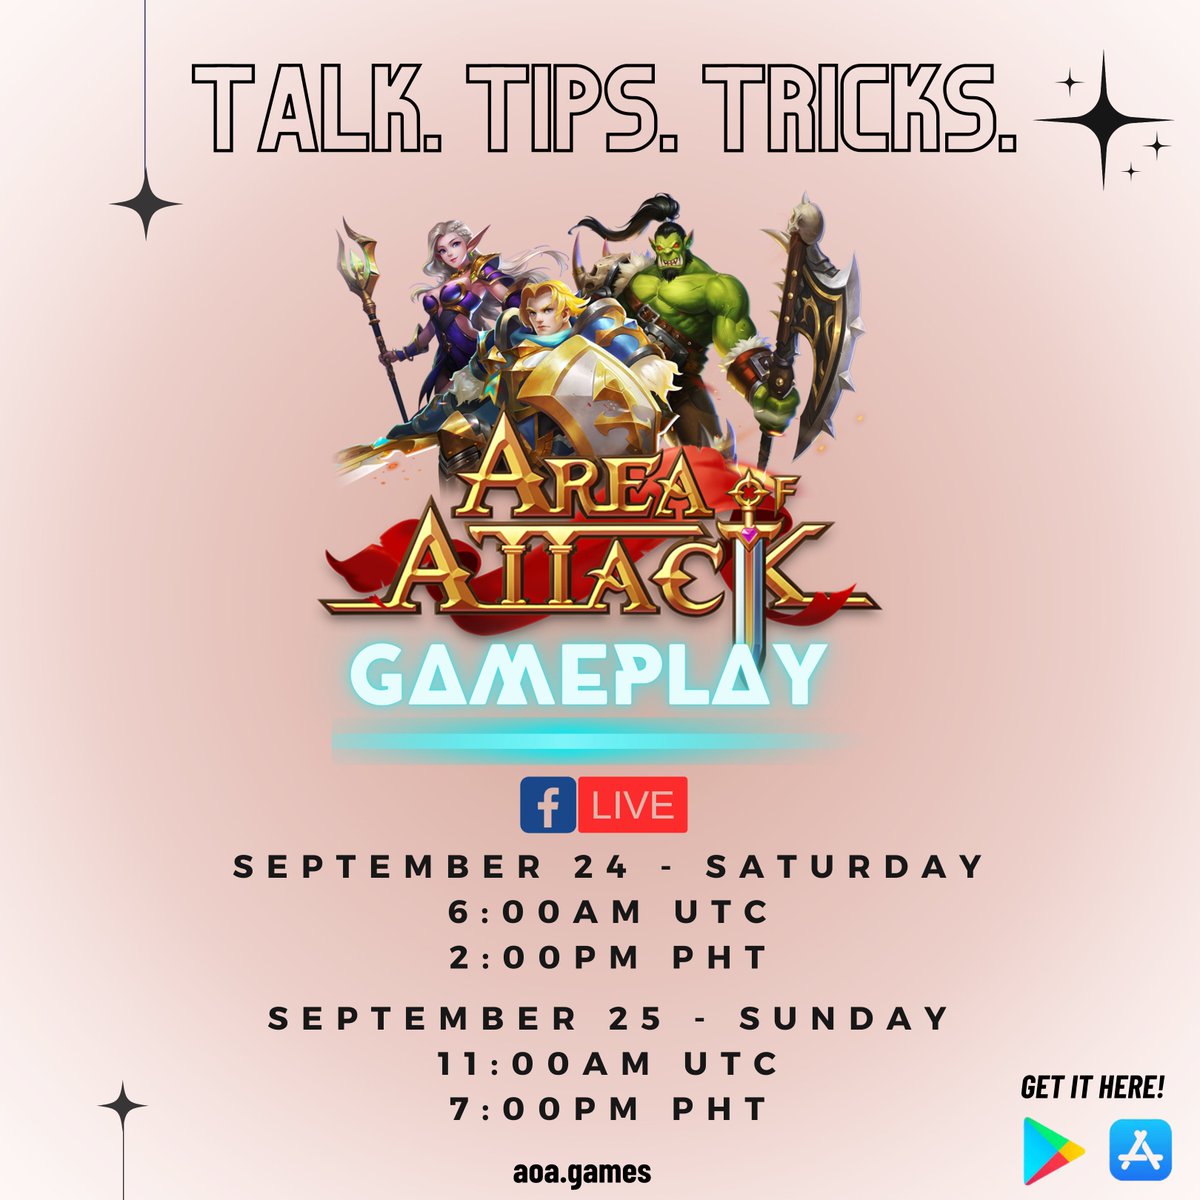 ✨ HAPPY FRIDAY, TOMORROW IT'S AREA OF ATTACK GAMEPLAY AGAIN!✨ 📅 Sept. 24, Saturday ⏰ 6:00am UTC / 2:00pm PHT 📅 Sept. 25, Sunday ⏰ 11:00am UTC / 7:00pm PHT Live on our Official Facebook Page: AREA OF ATTACK GLOBAL TUNE IN, TEAM AoA!!! 💖 #AreaOfAttack #AoAGamePlay